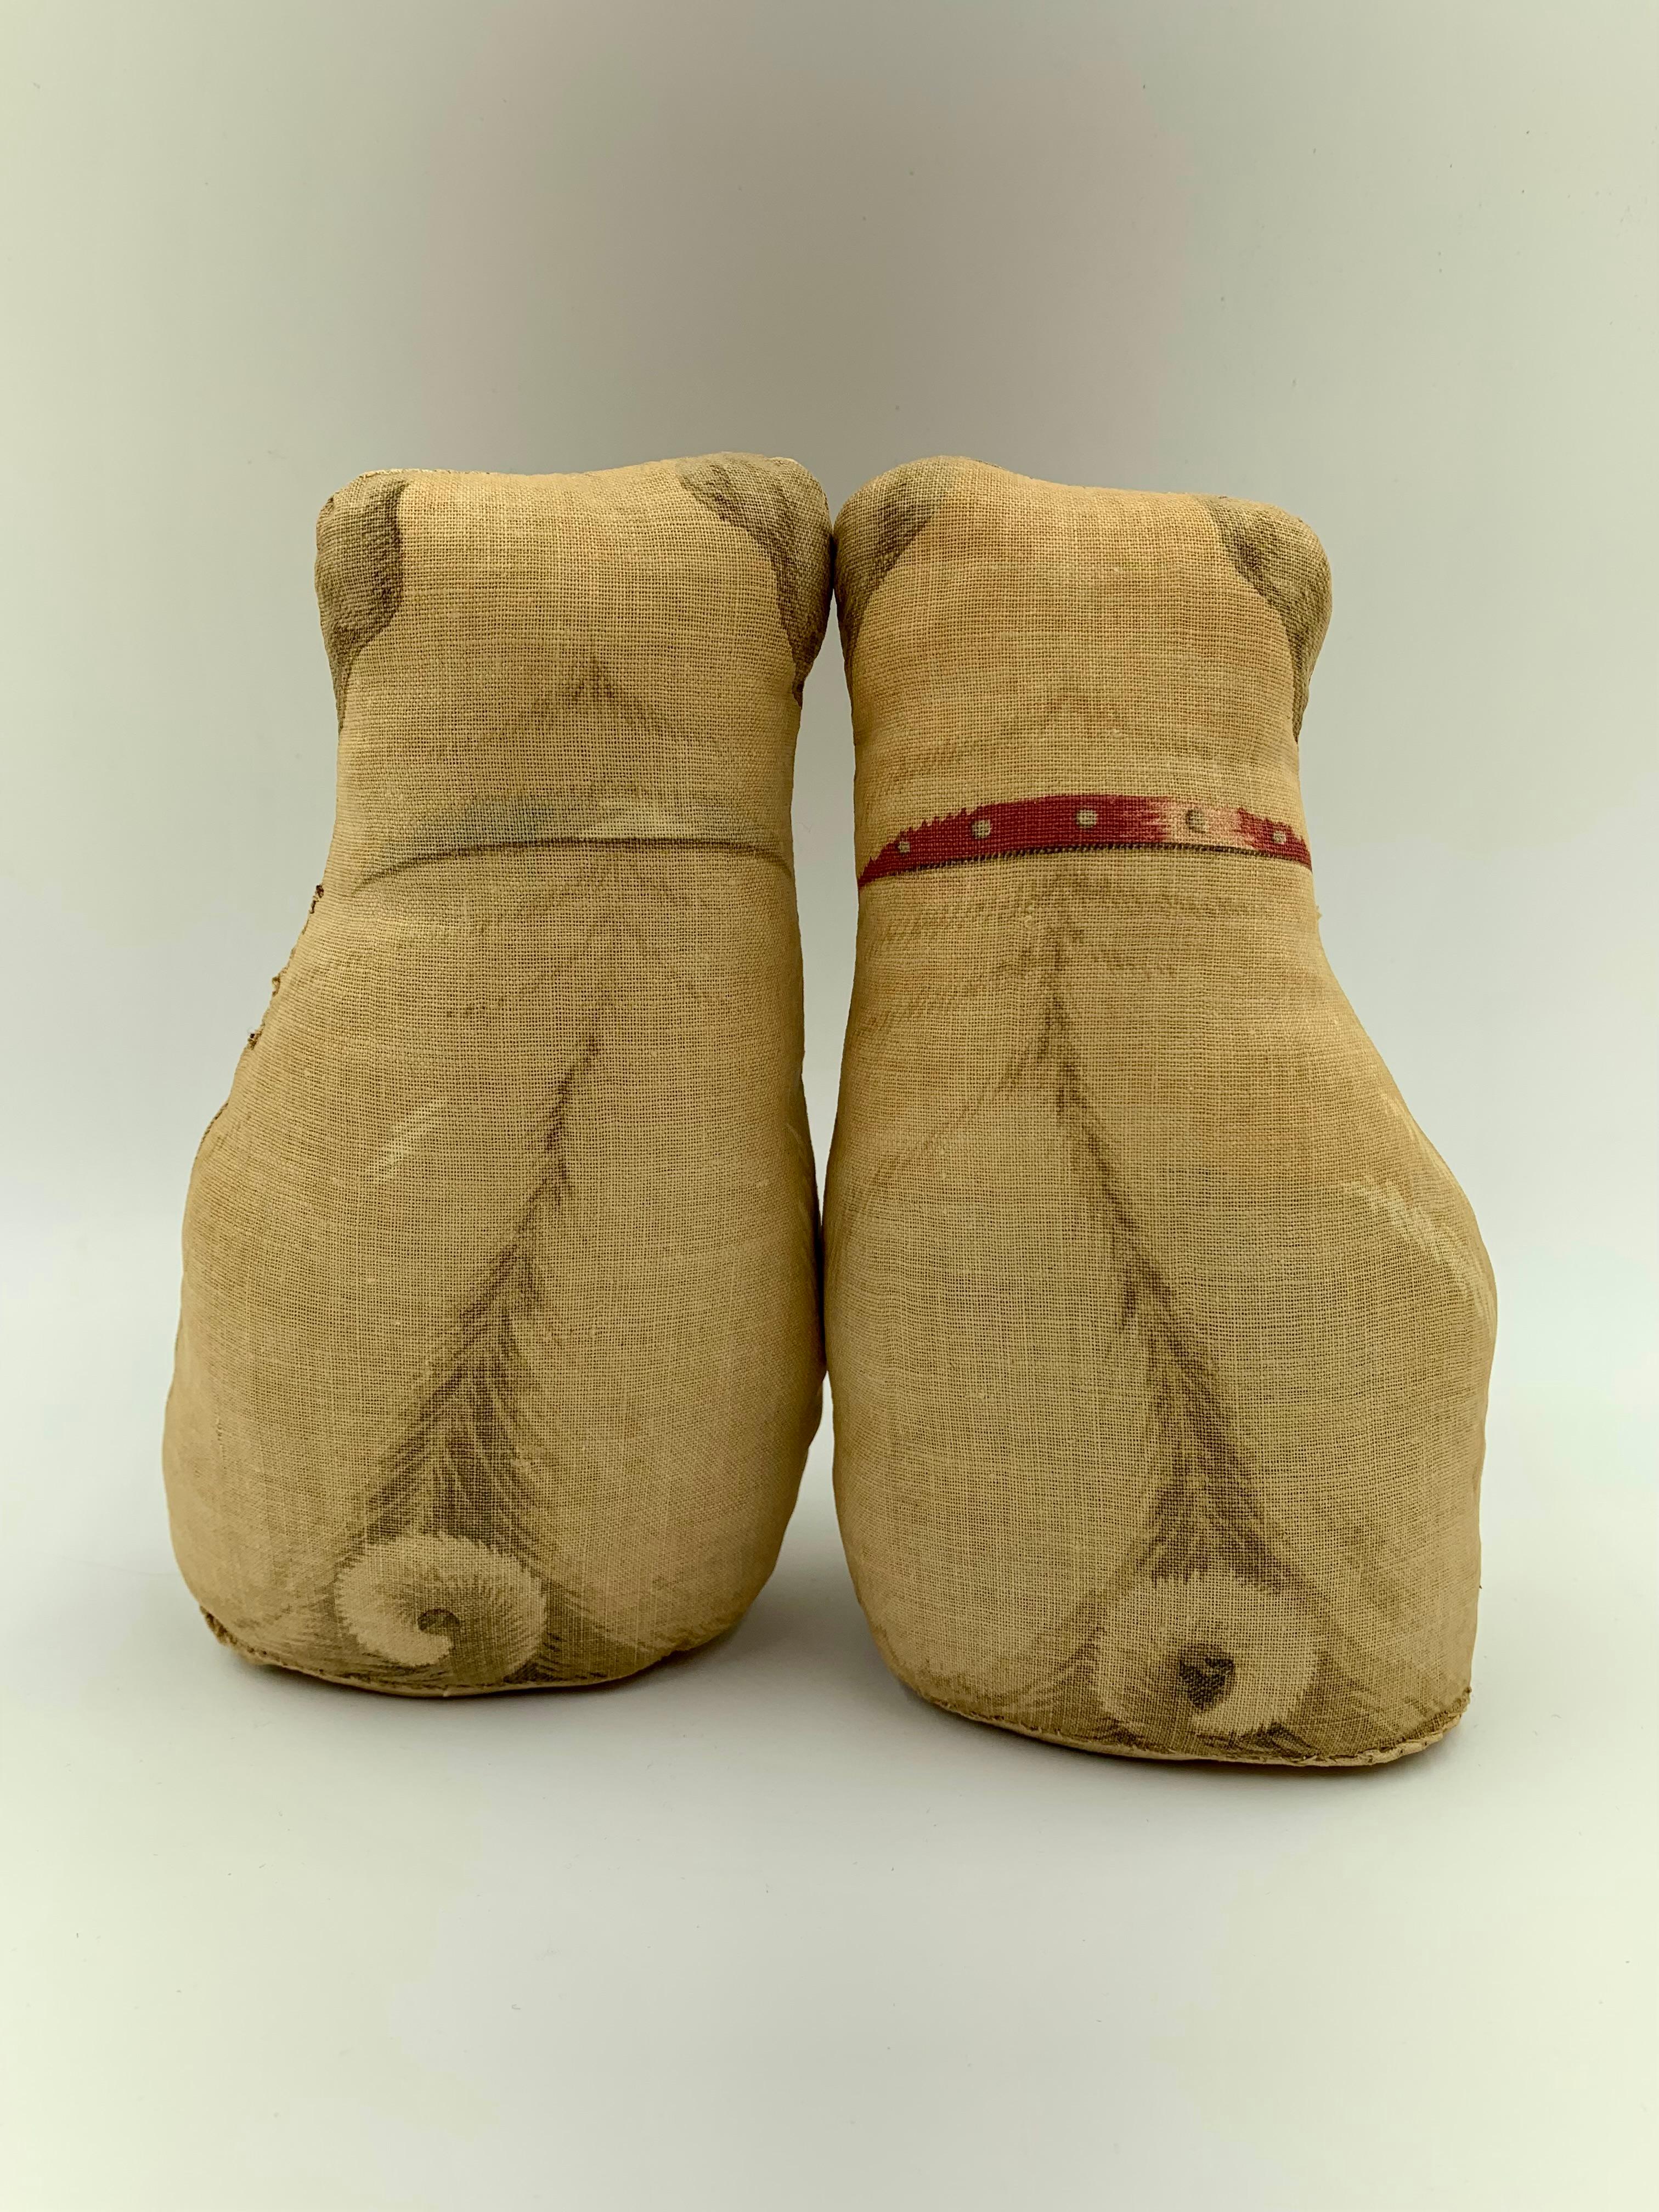 Adorable pair of early 20th century printed cotton pug pillows nearly identical to a pair from the collection of Duke and Duchess of Windsor Sotheby's auction, September 11-19, 1997
Comprised of a male pug with a red collar and a female pug with a